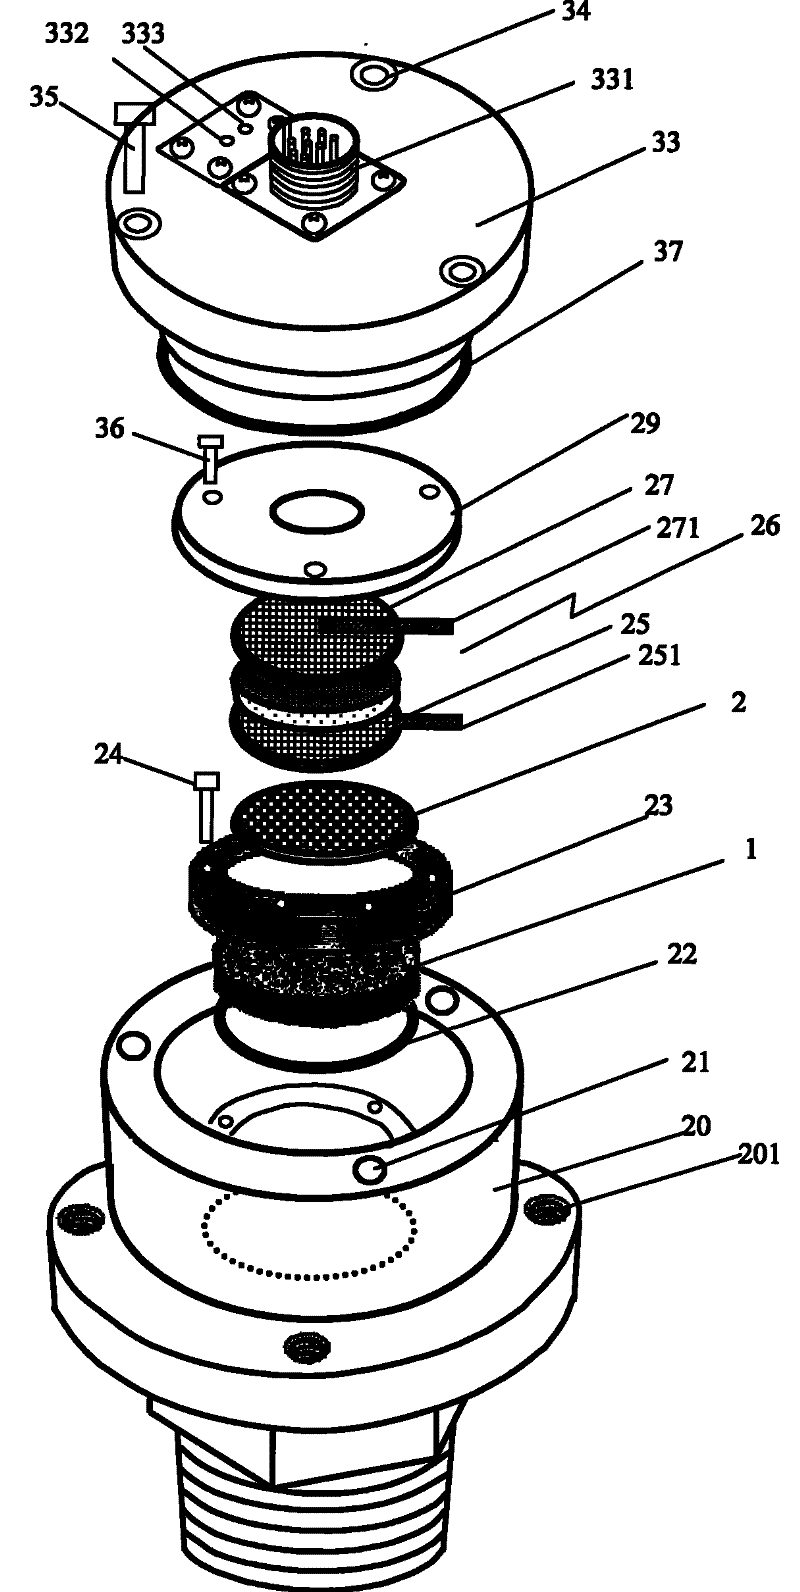 Gas sensor for monitoring gas content in insulating oil